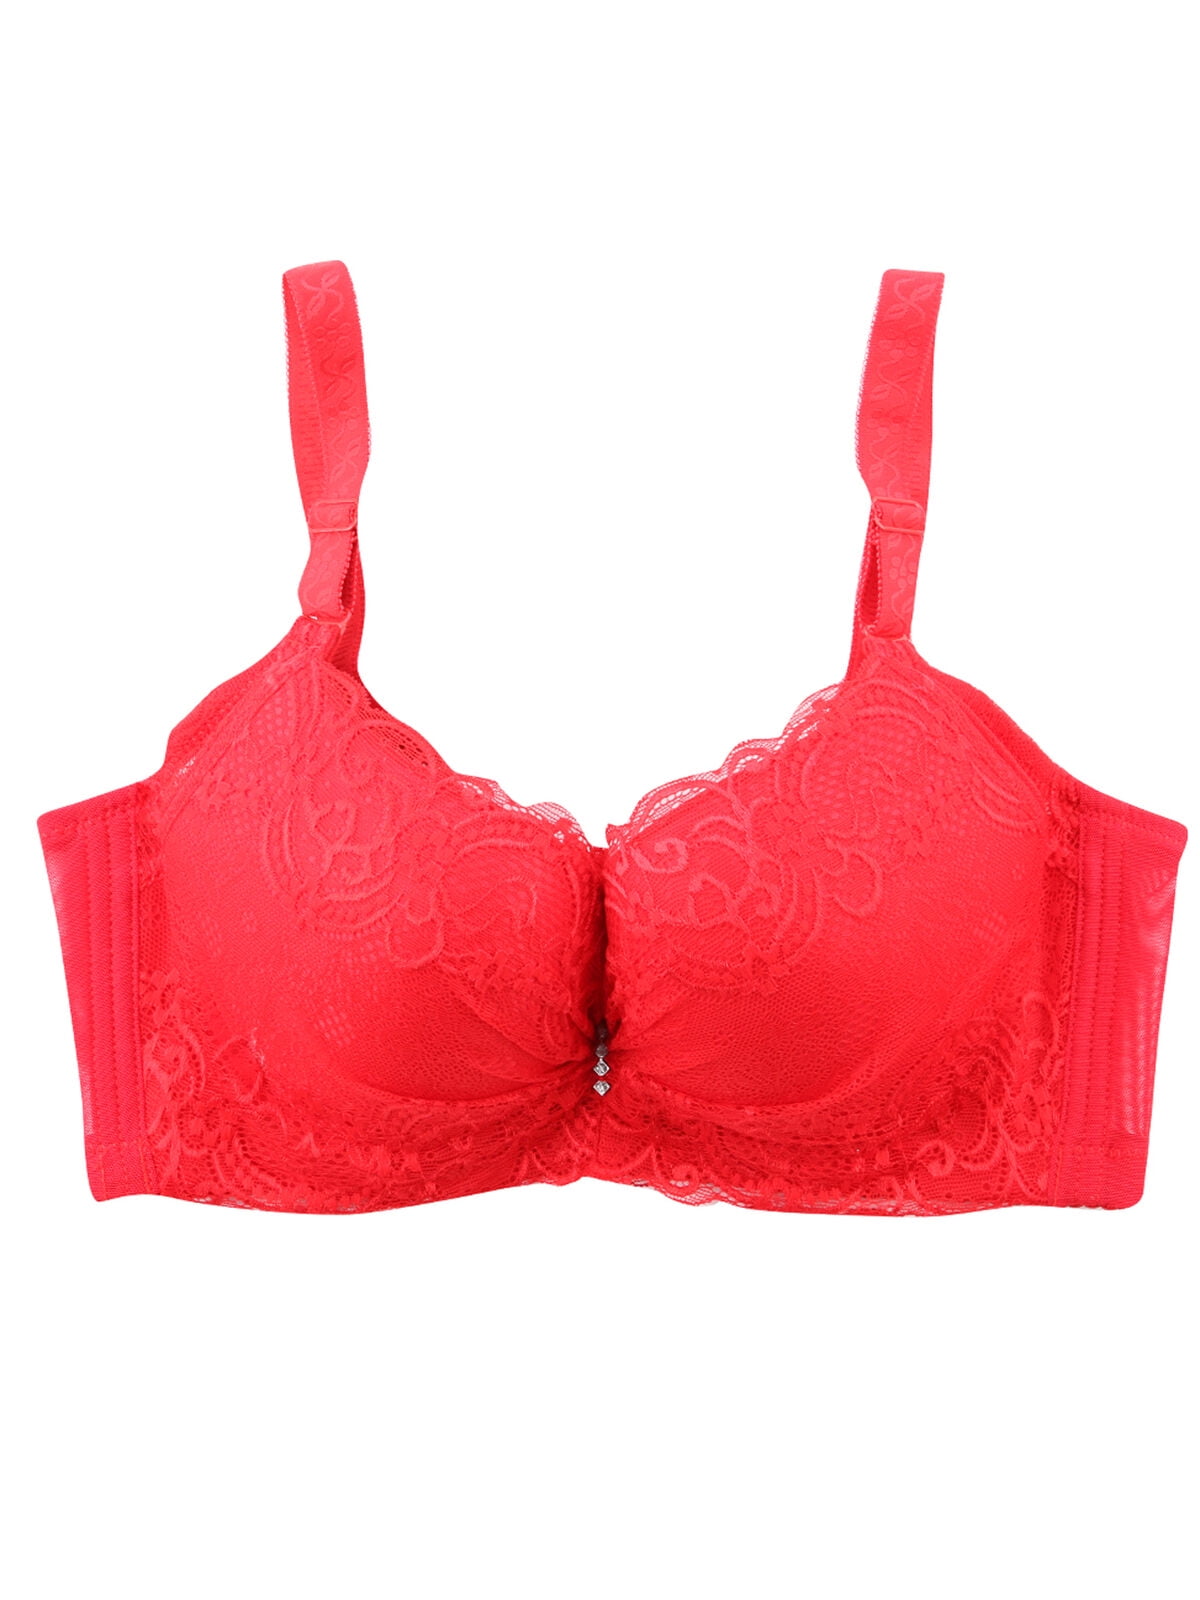 Calsunbaby - Push-up Bras for Women Underwire Padded Lace Embroidered ...